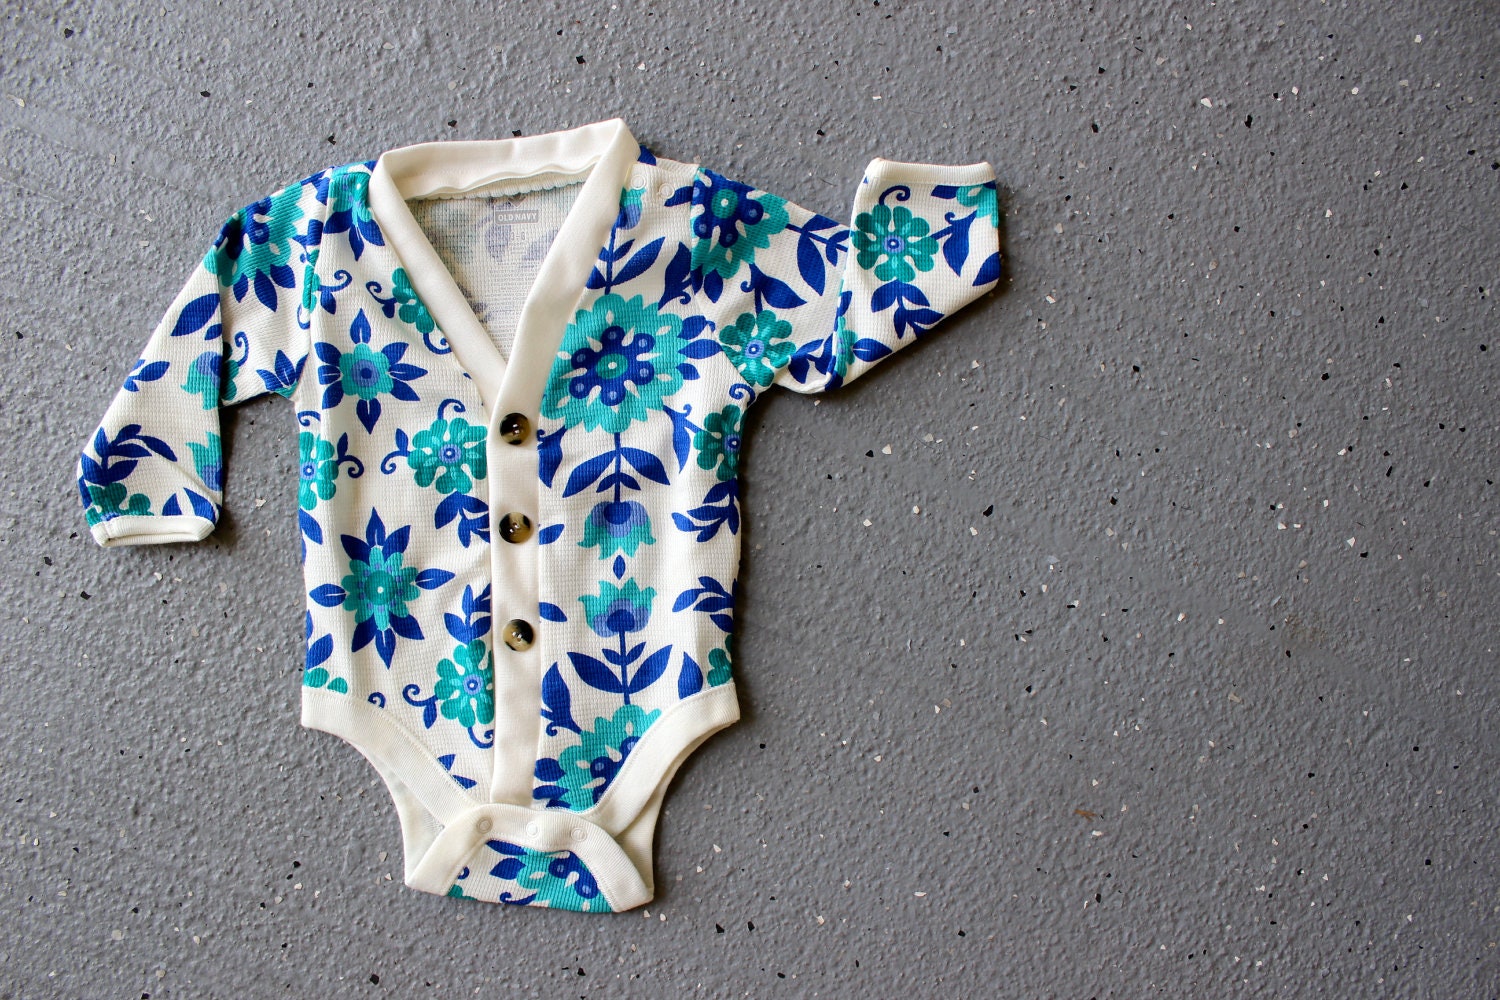 Baby Cardigan Onesie Blue Floral Perfect for a Fall or